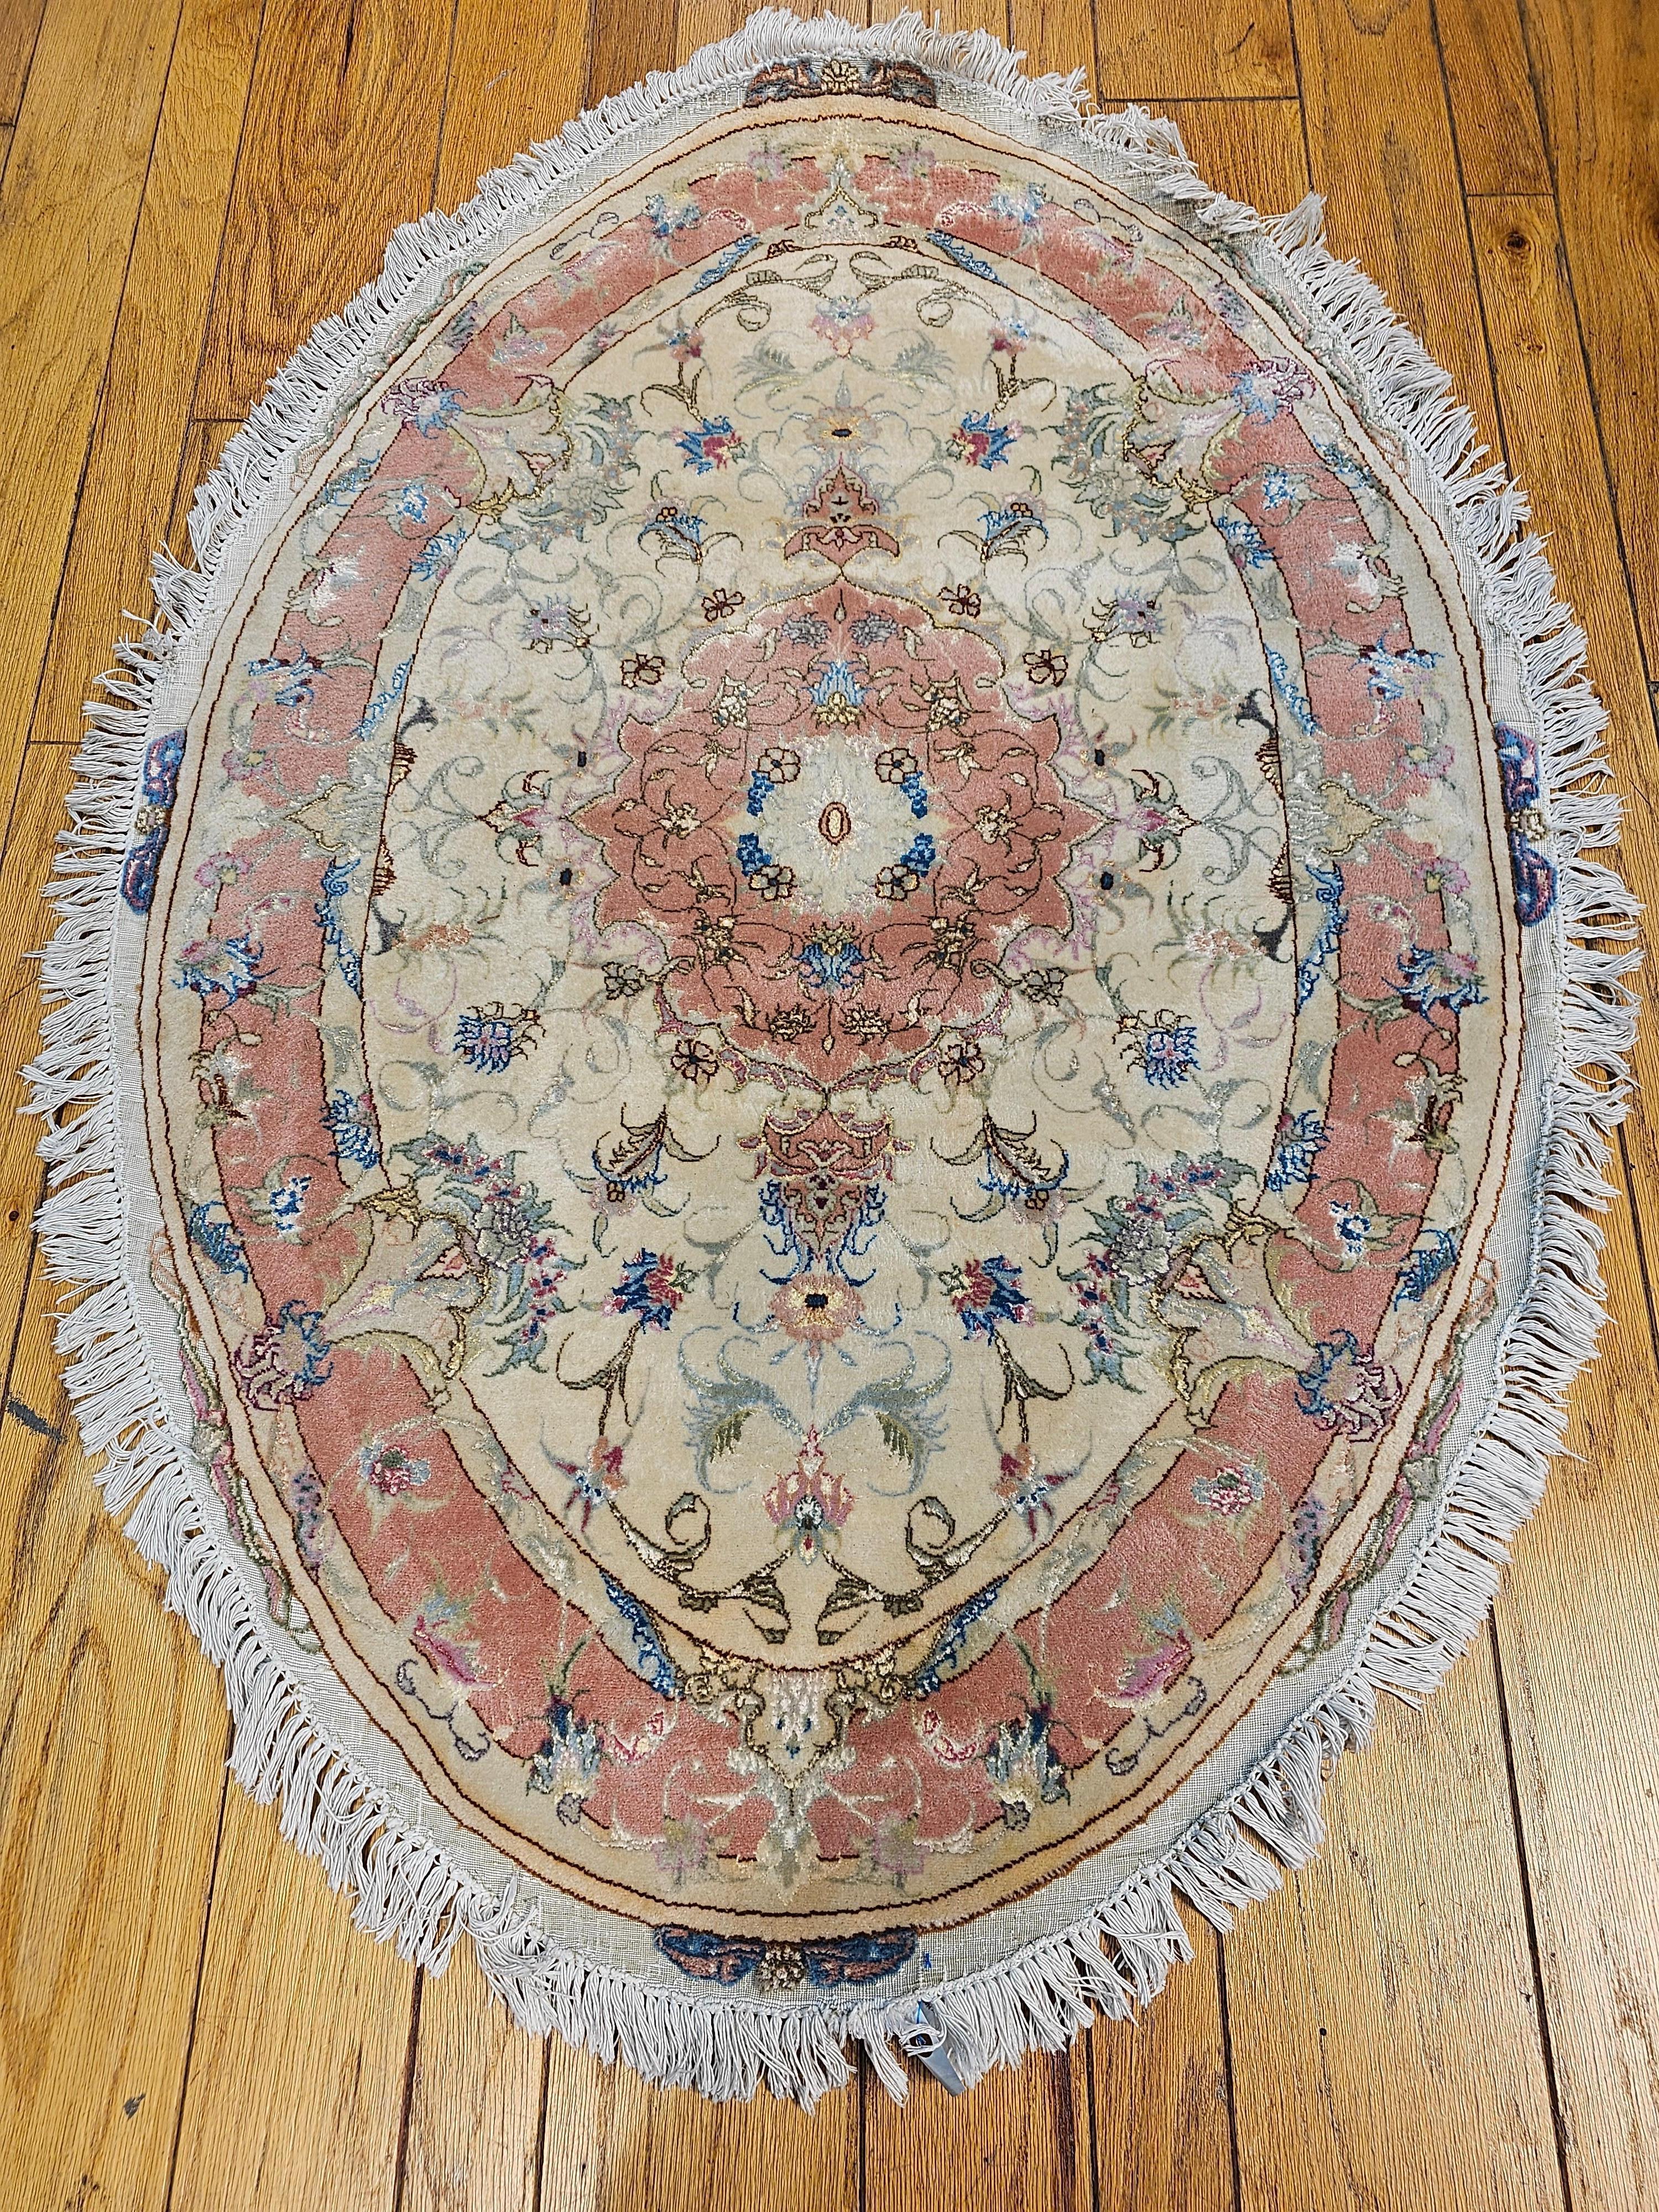 A rare and very desirable oval shape Persian Tabriz Area Rug in floral pattern with silk highlights in pastel colors from the 4th quarter of the 1900s. The rug has a floral design set in a cream color field with a pale salmon/pink color border.  